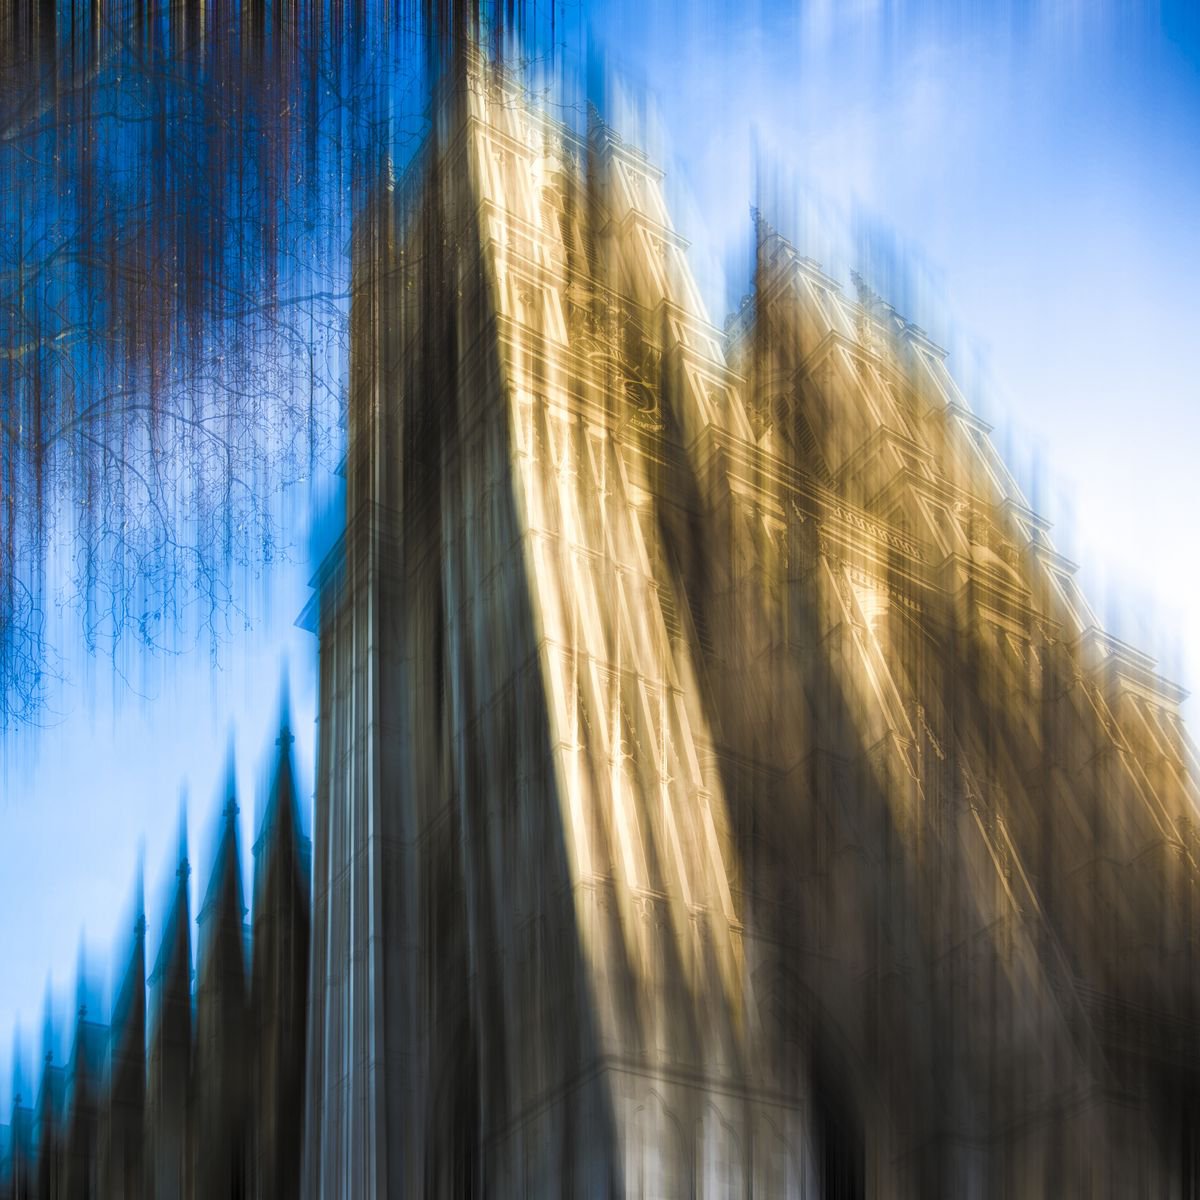 Abstract London: Westminster Abbey by Graham Briggs